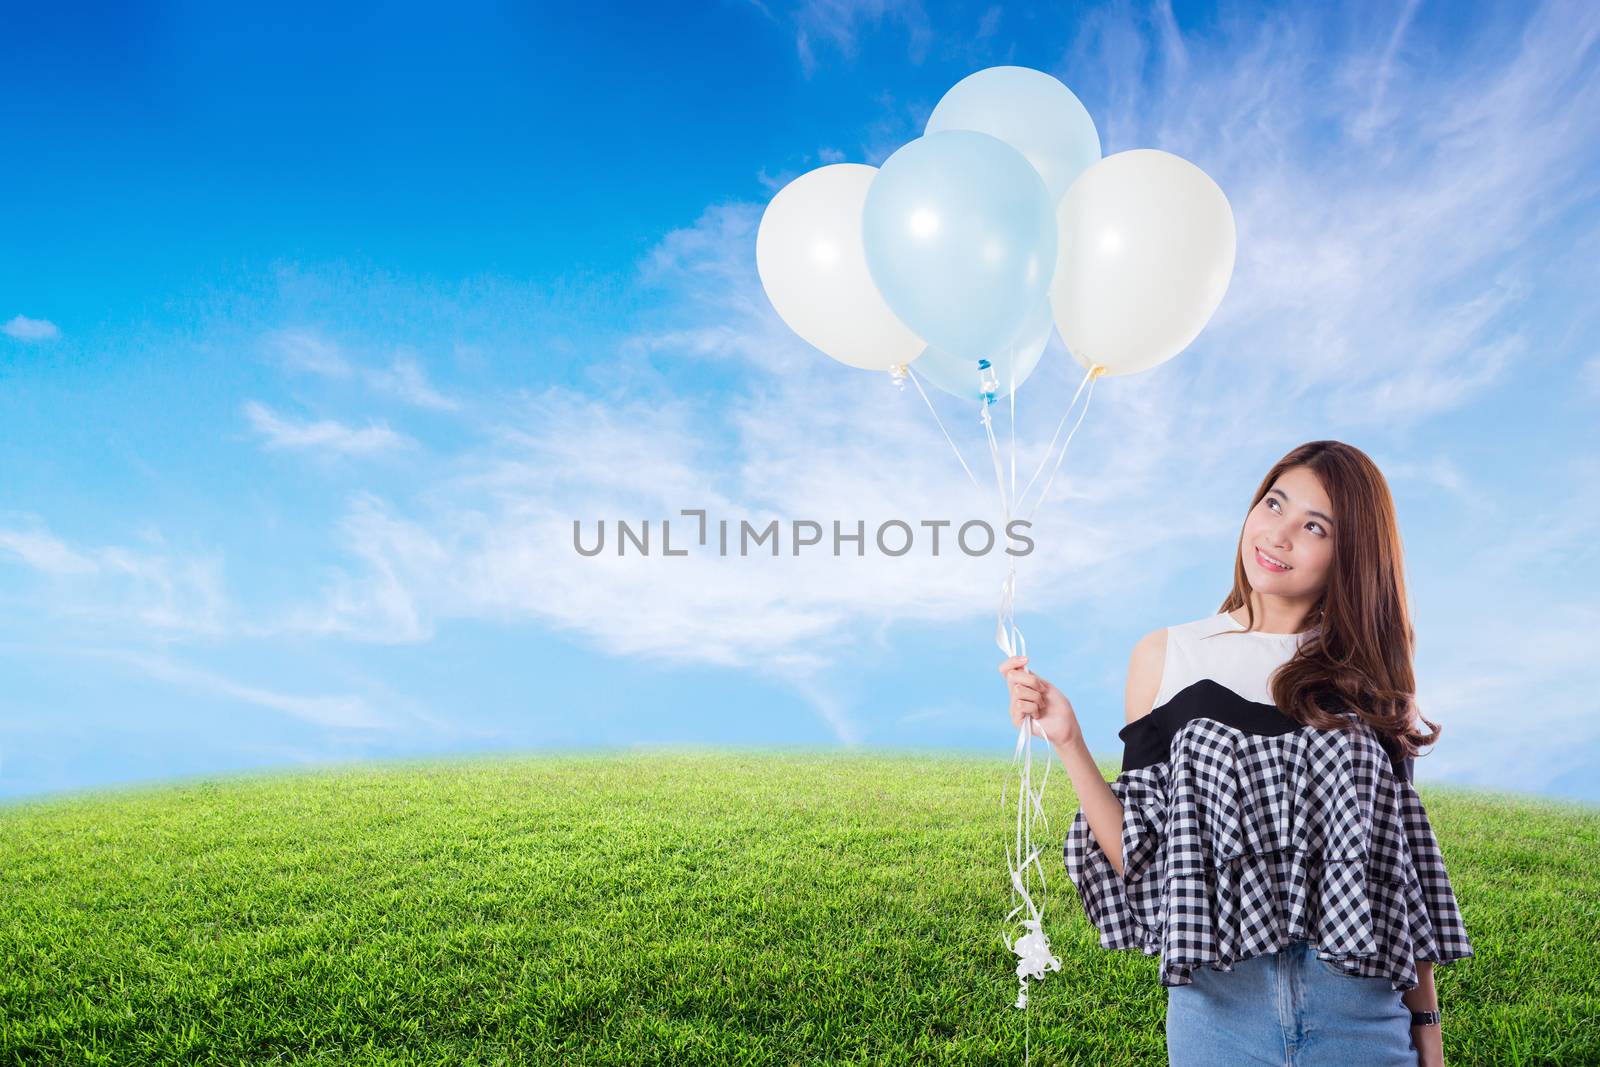 Young woman holding balloons on meadow summer with freedom lifestyle concept.